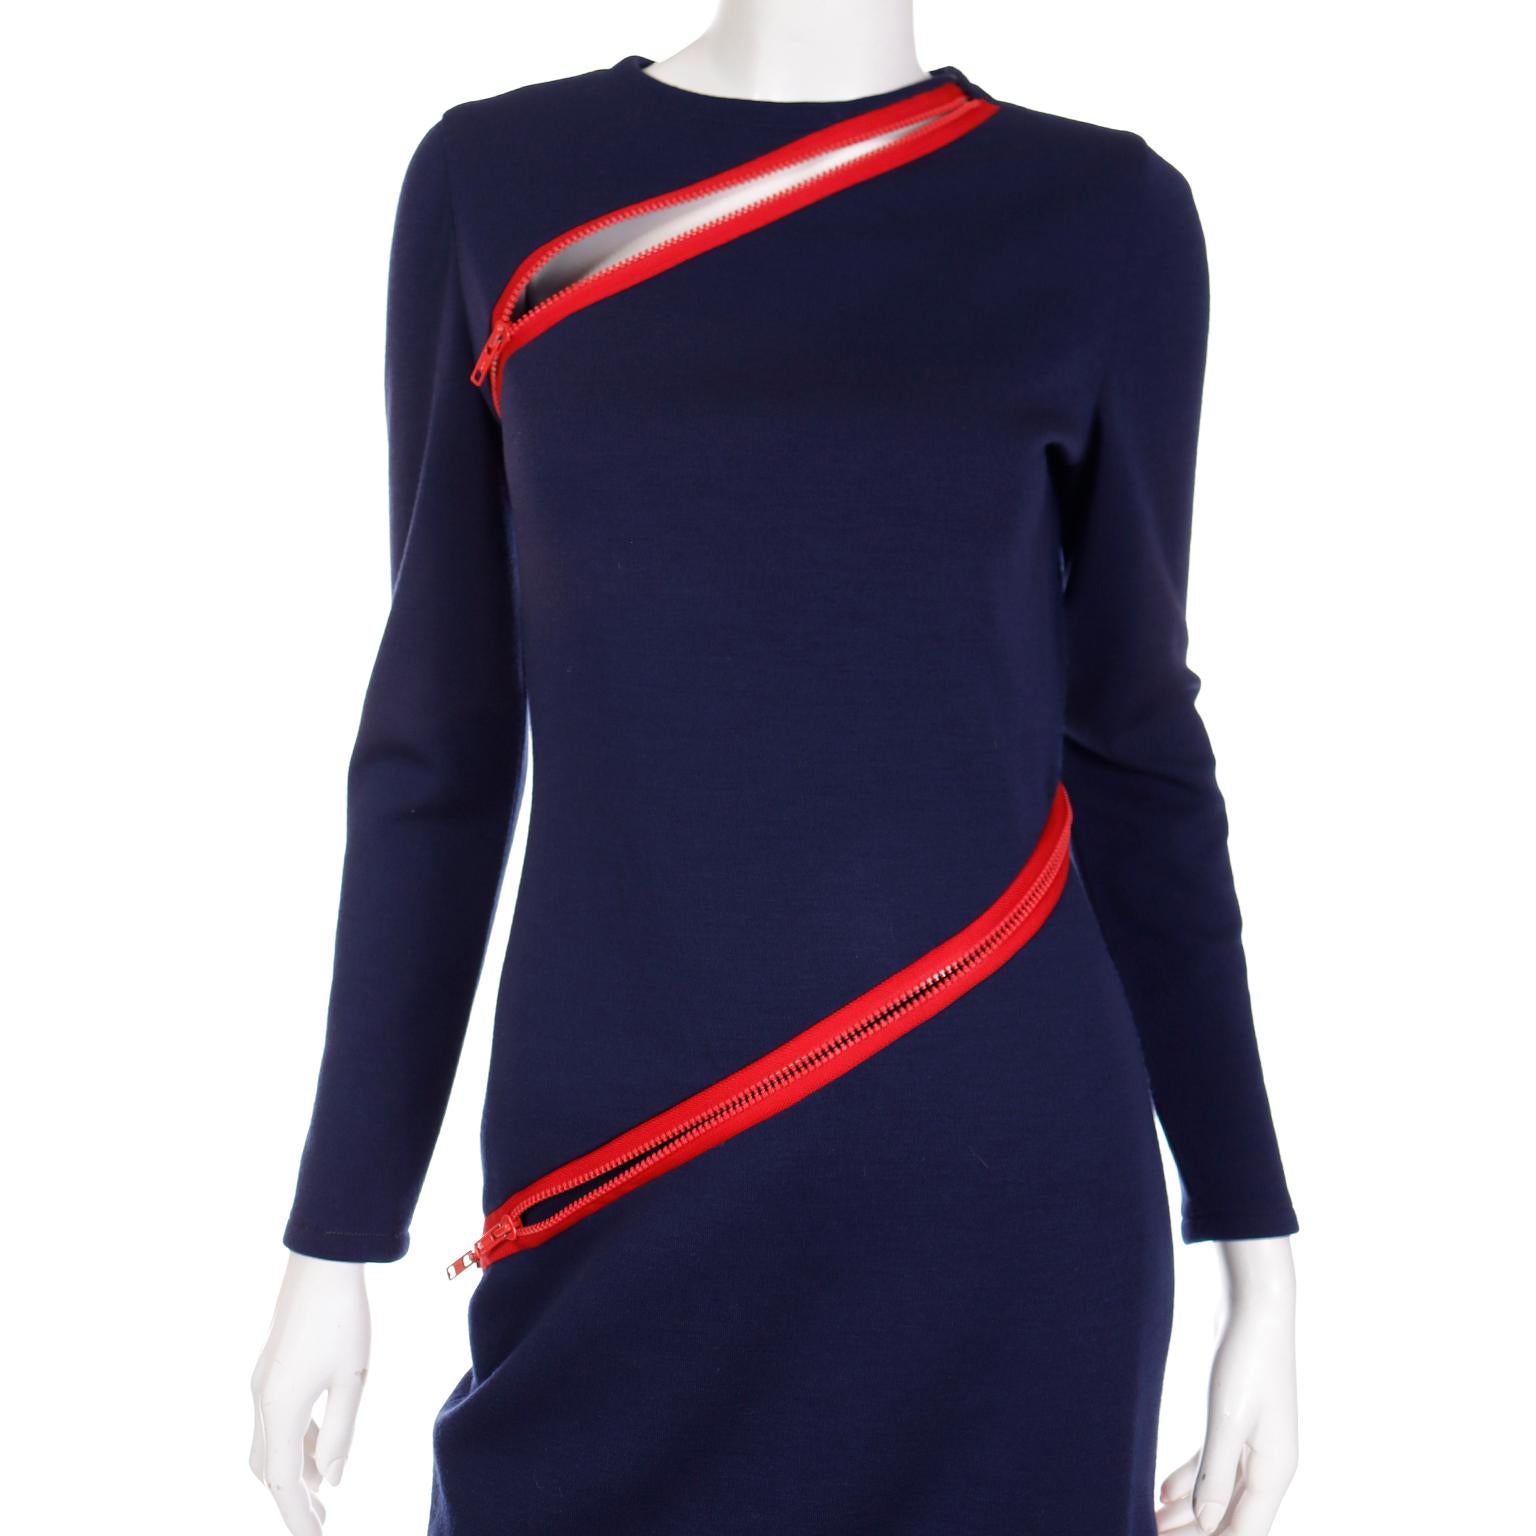 Vintage Bill Blass Navy Blue Knit Dress With Functional Red Zippers For Sale 3